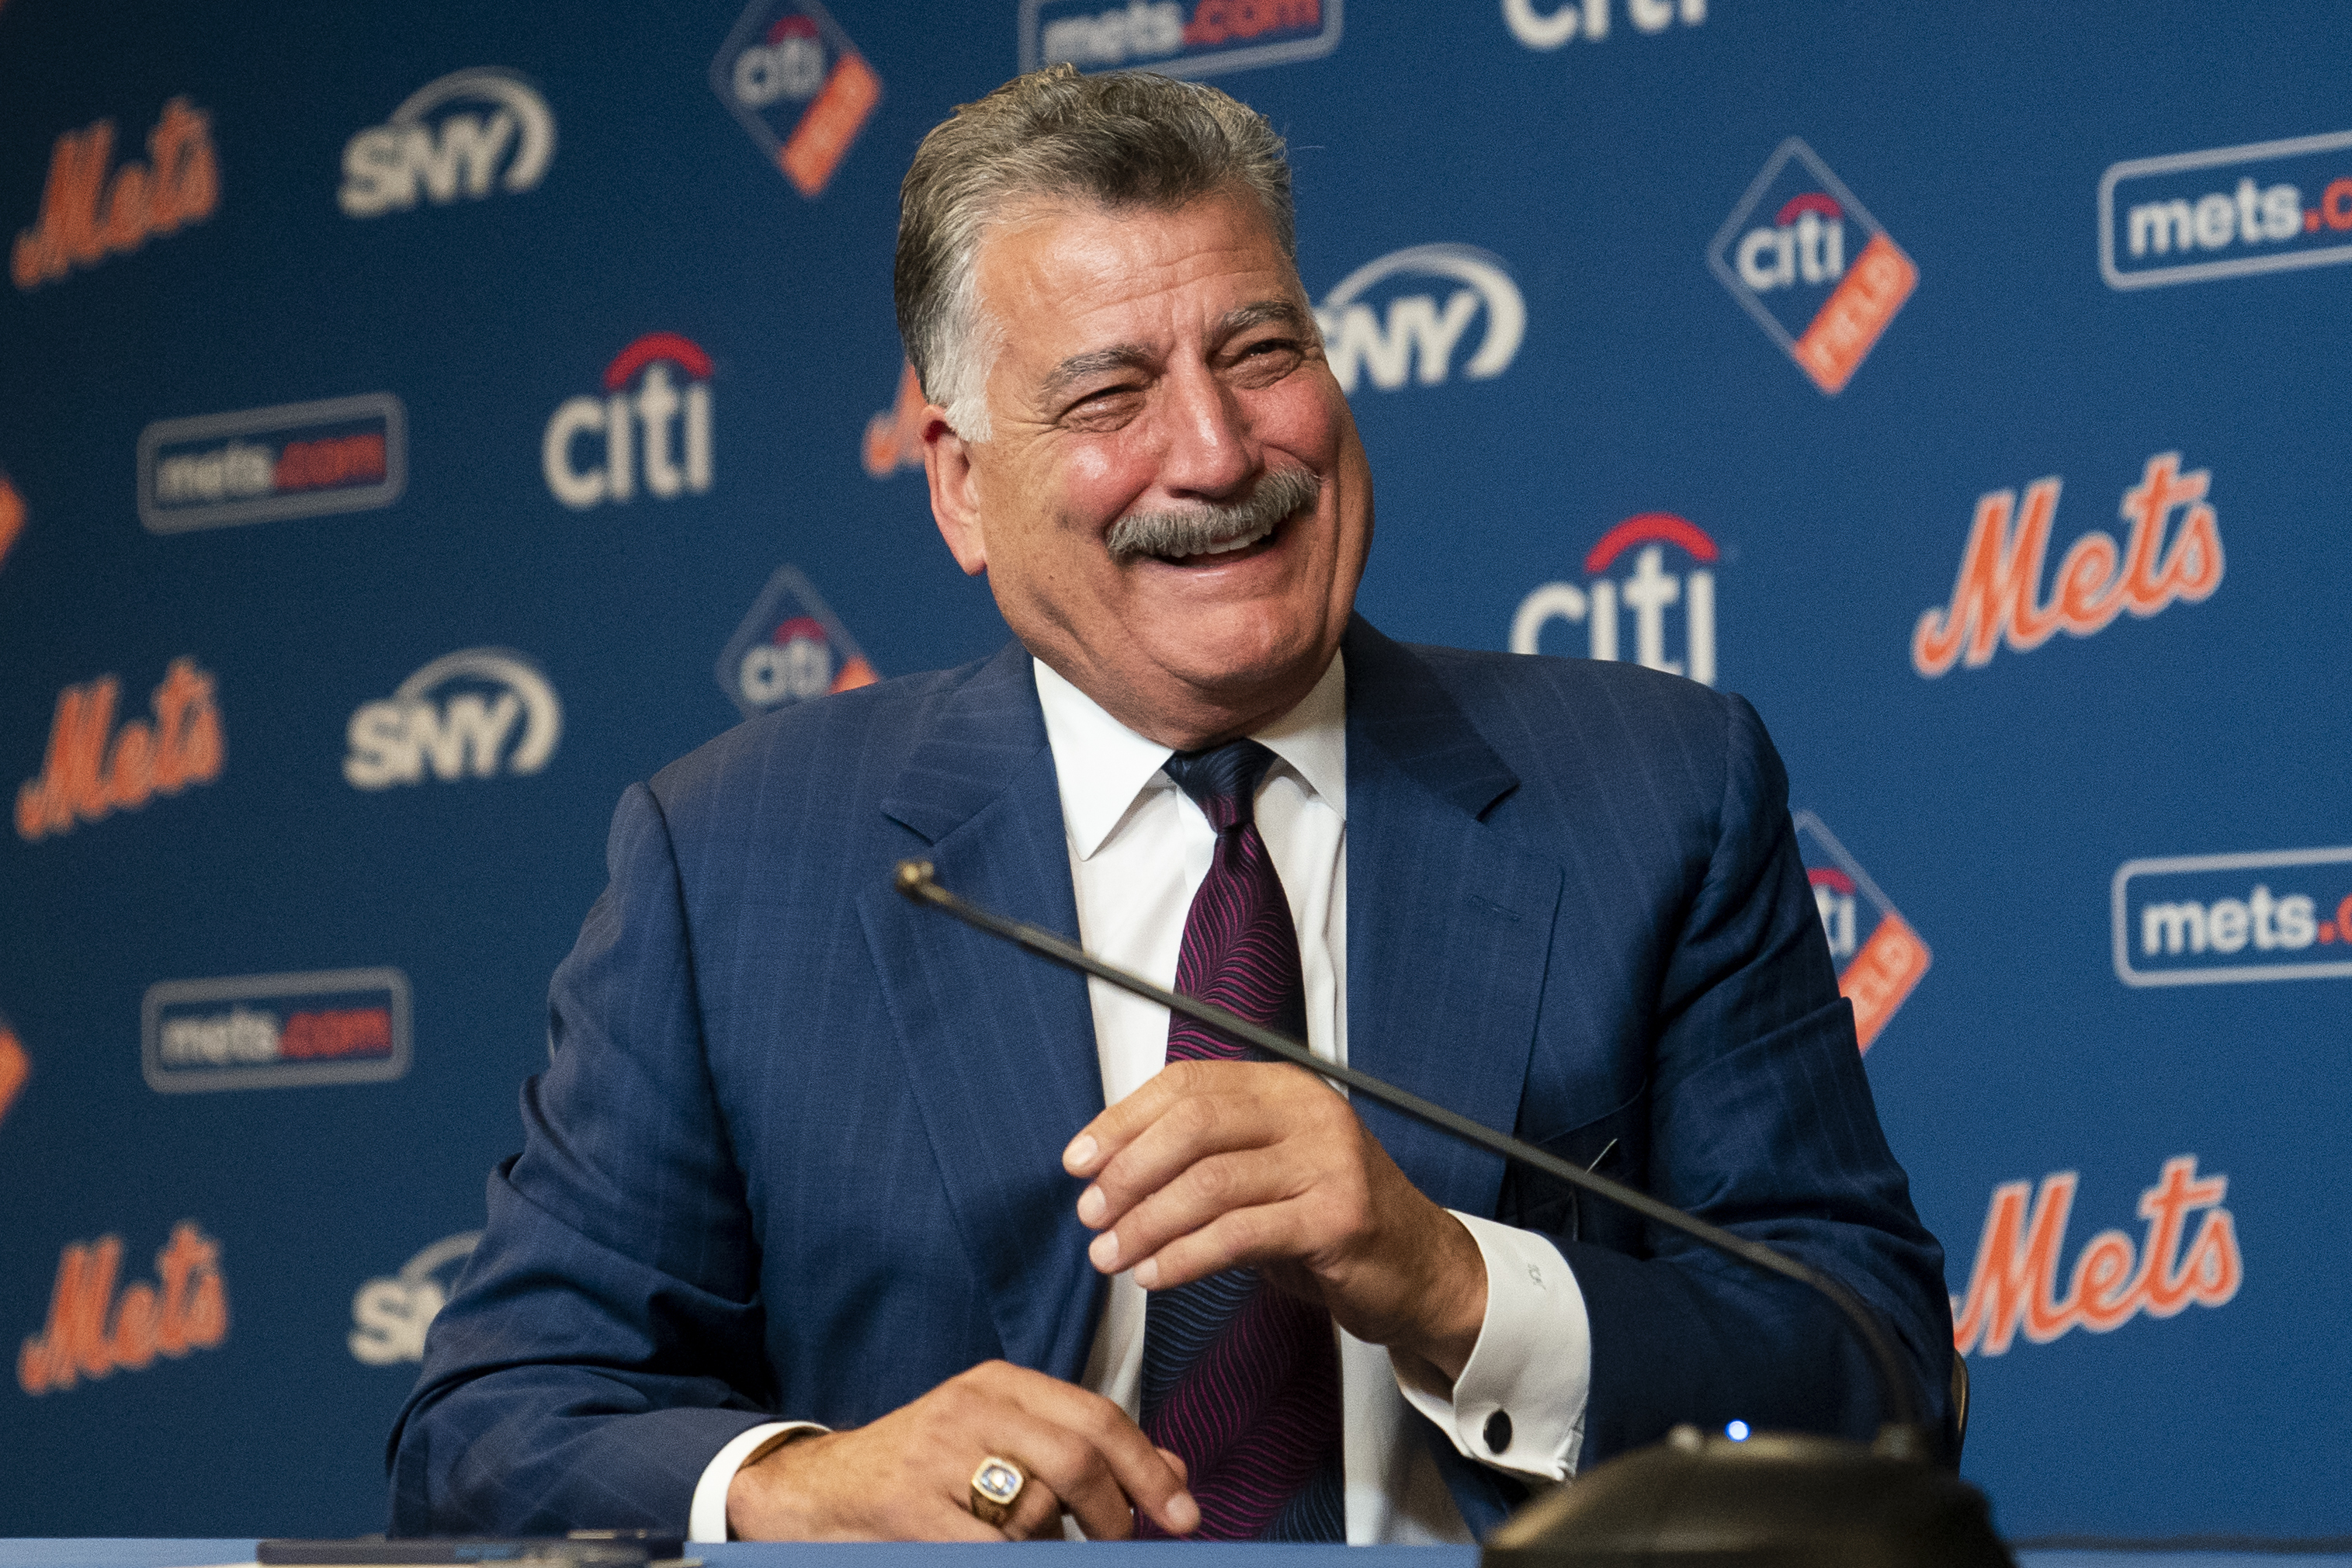 Keith Hernandez's top Mets moments, No. 5: The Office